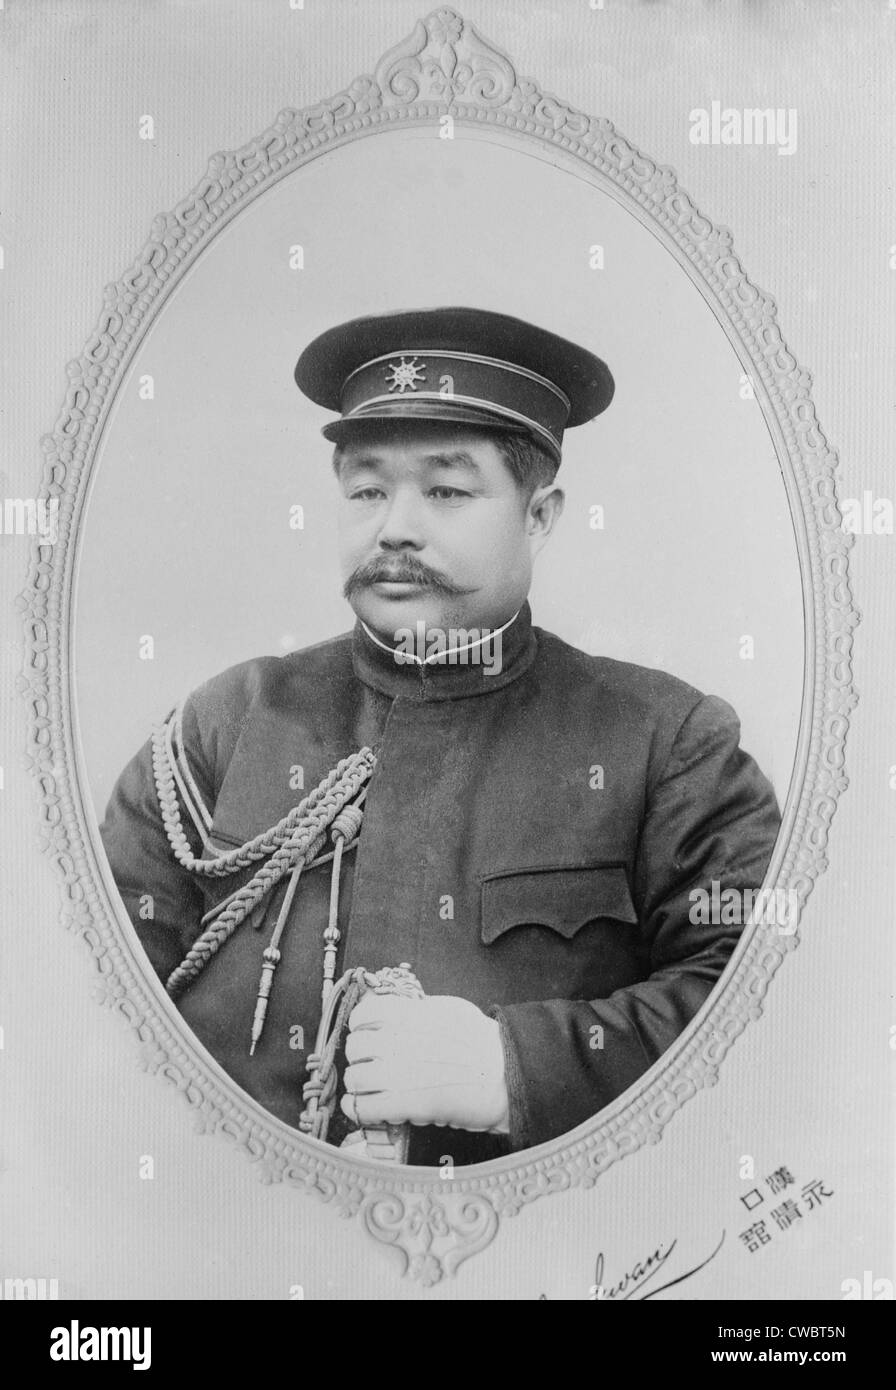 Li Yuen Hung, President of China, 1916-17. A former military officer, who in his short presidency, attempted to strengthen the Stock Photo